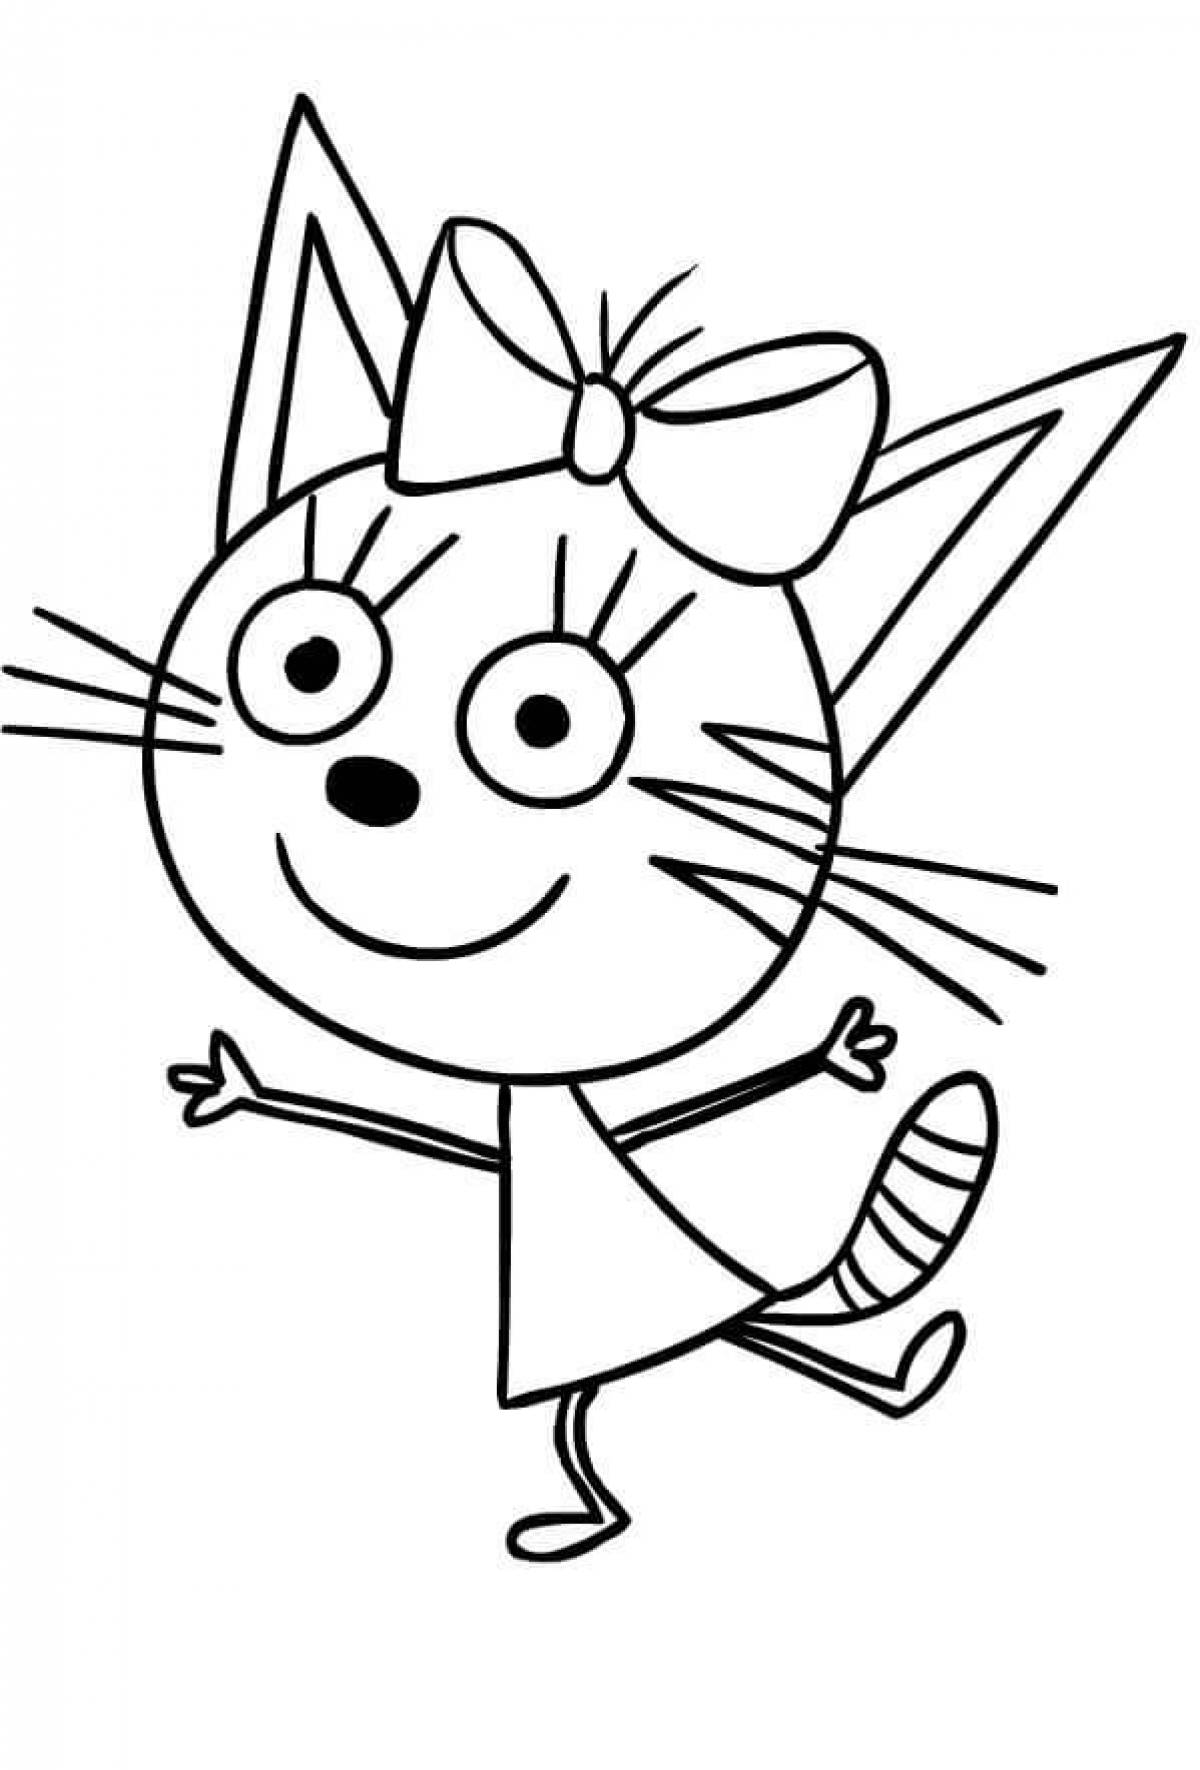 Sweet 3 cats coloring page